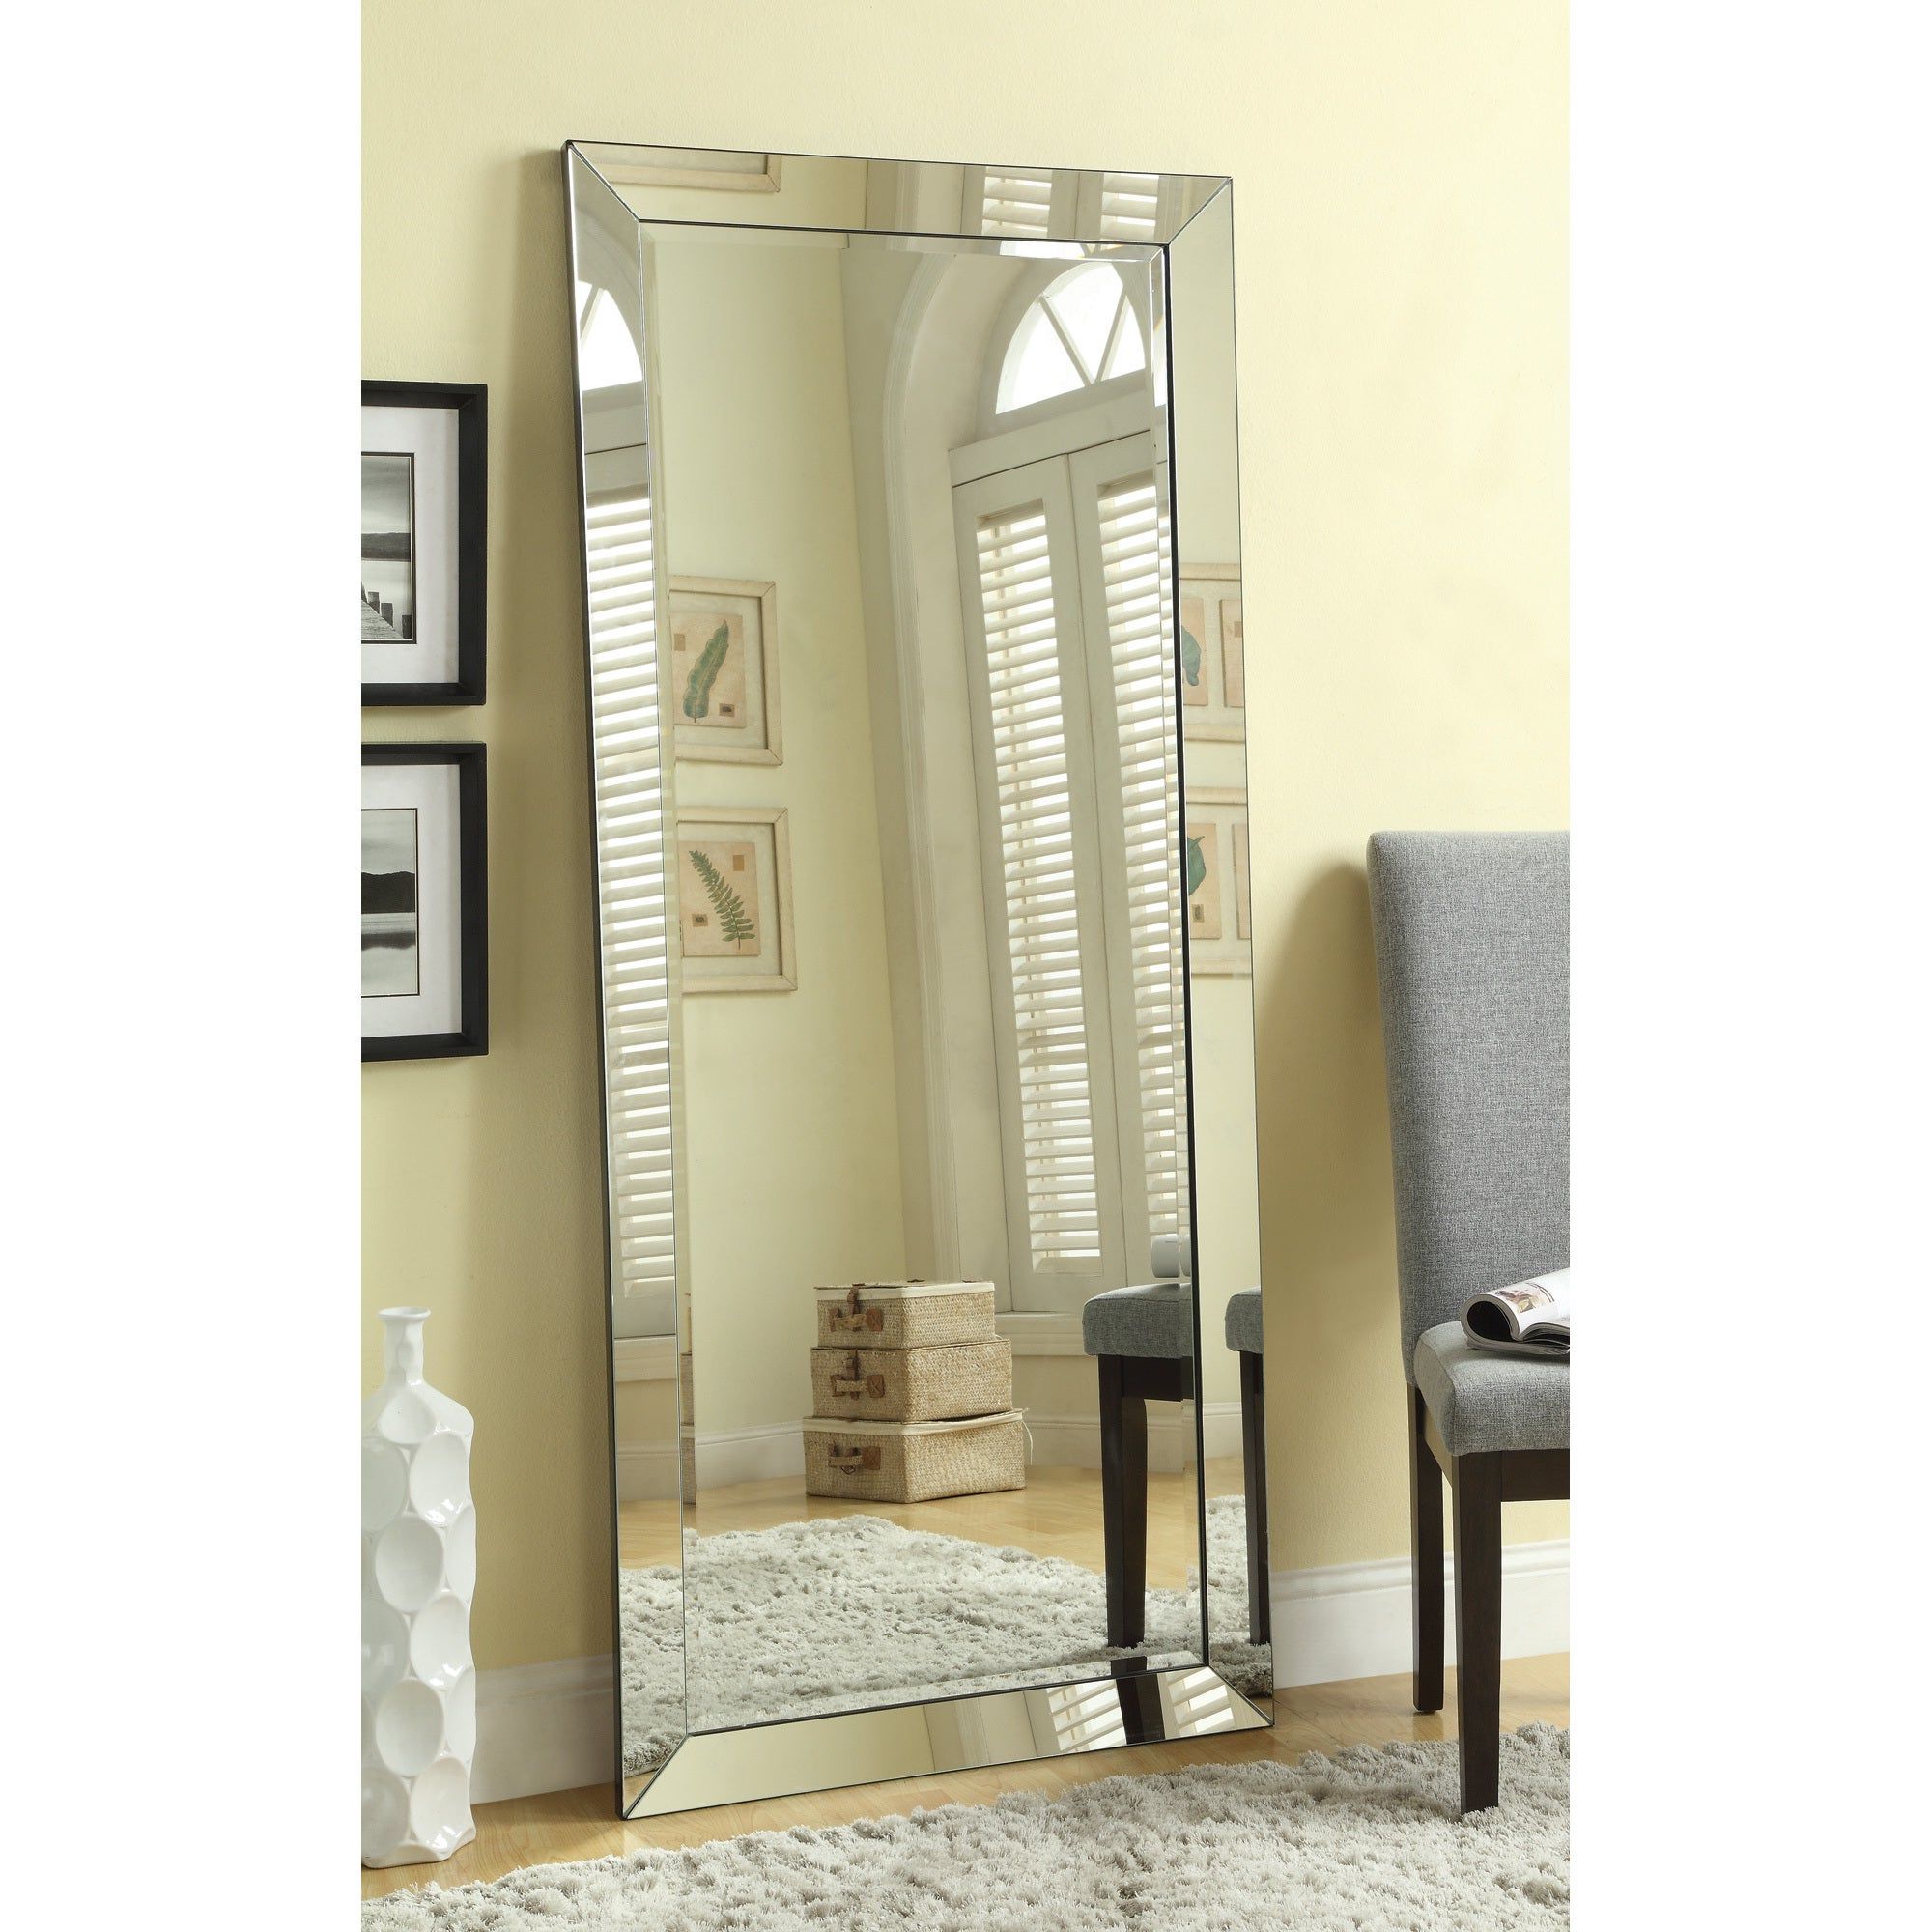 Best And Newest Wall Mirror With Mirror Frame Inside Large Standing Wall Mirror With Mirror Frame – 30" X  (View 4 of 20)